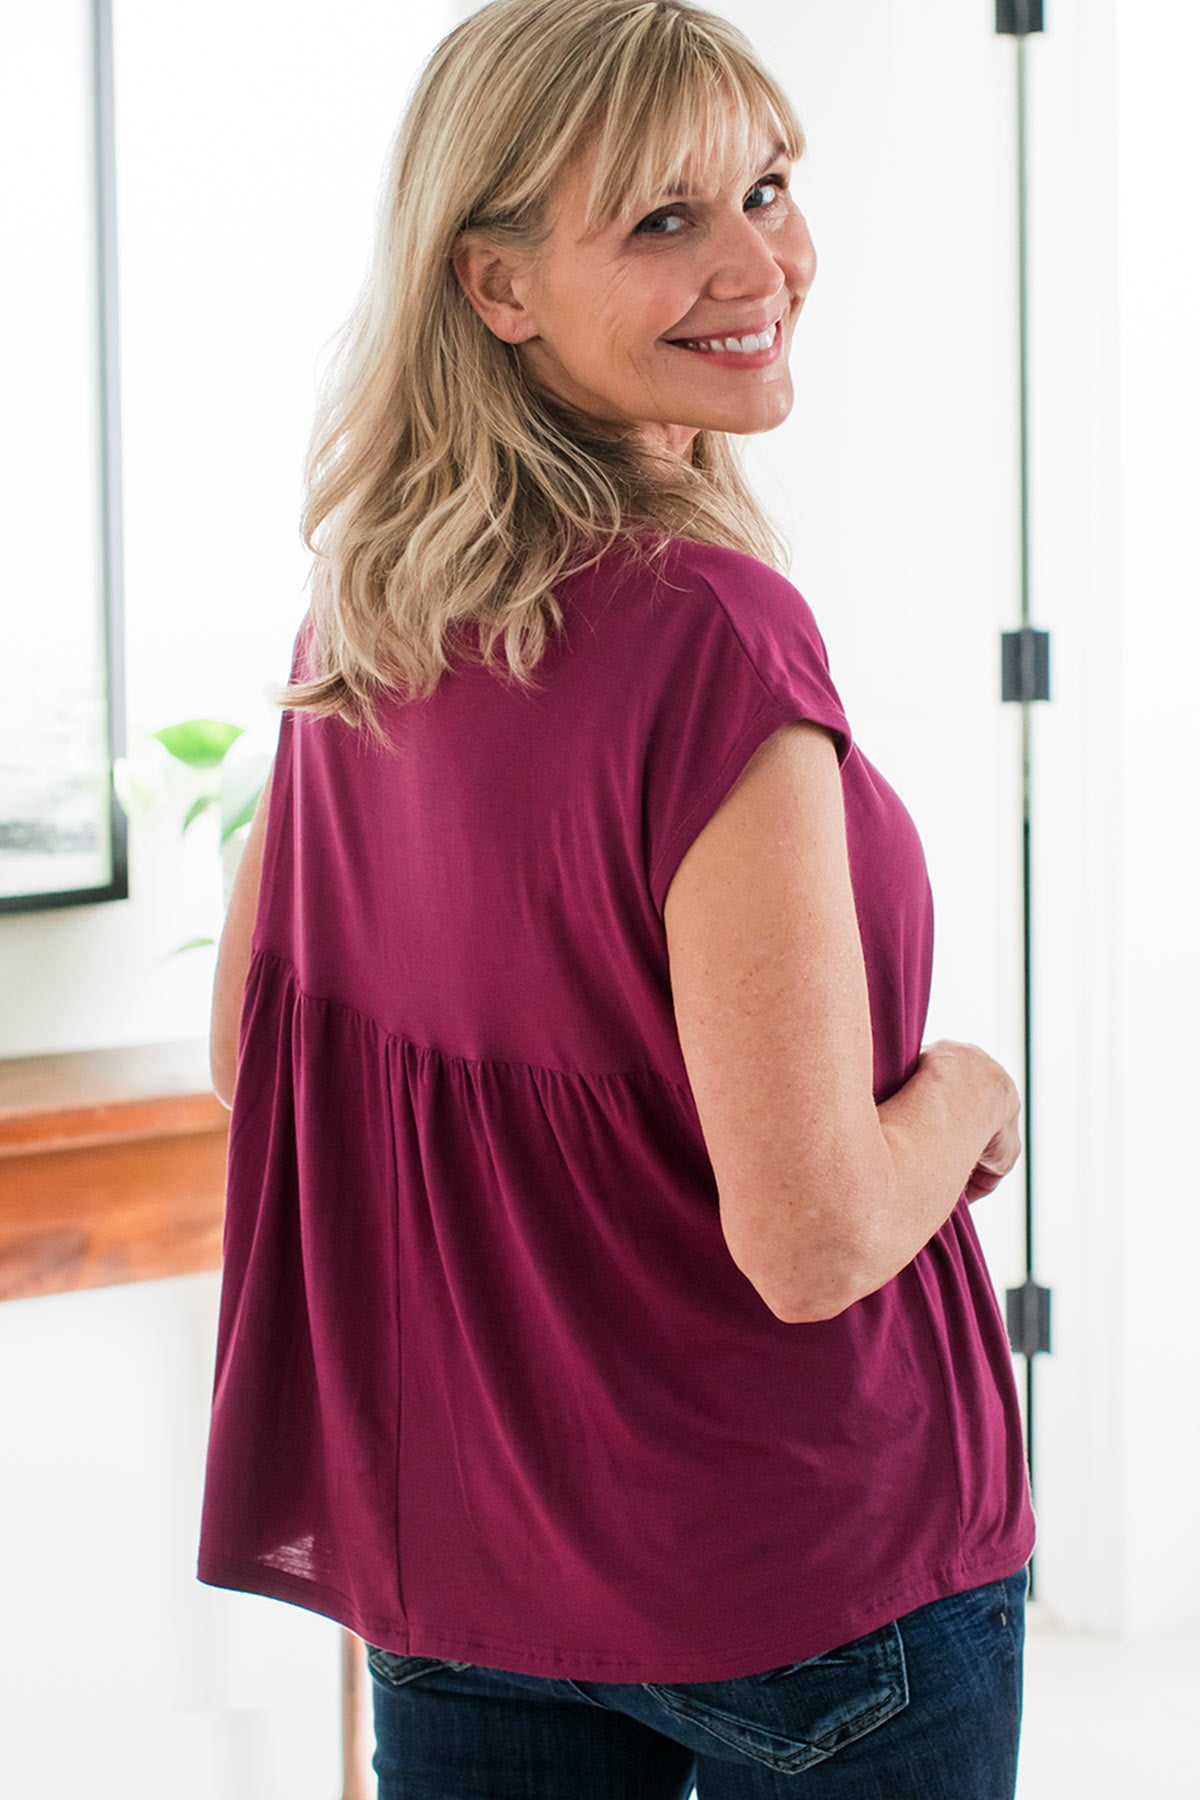 A woman standing with her back to the camera, smiling and looking back over her shoulder, wearing Yala Opal Swing Bamboo Top in Boysenberry